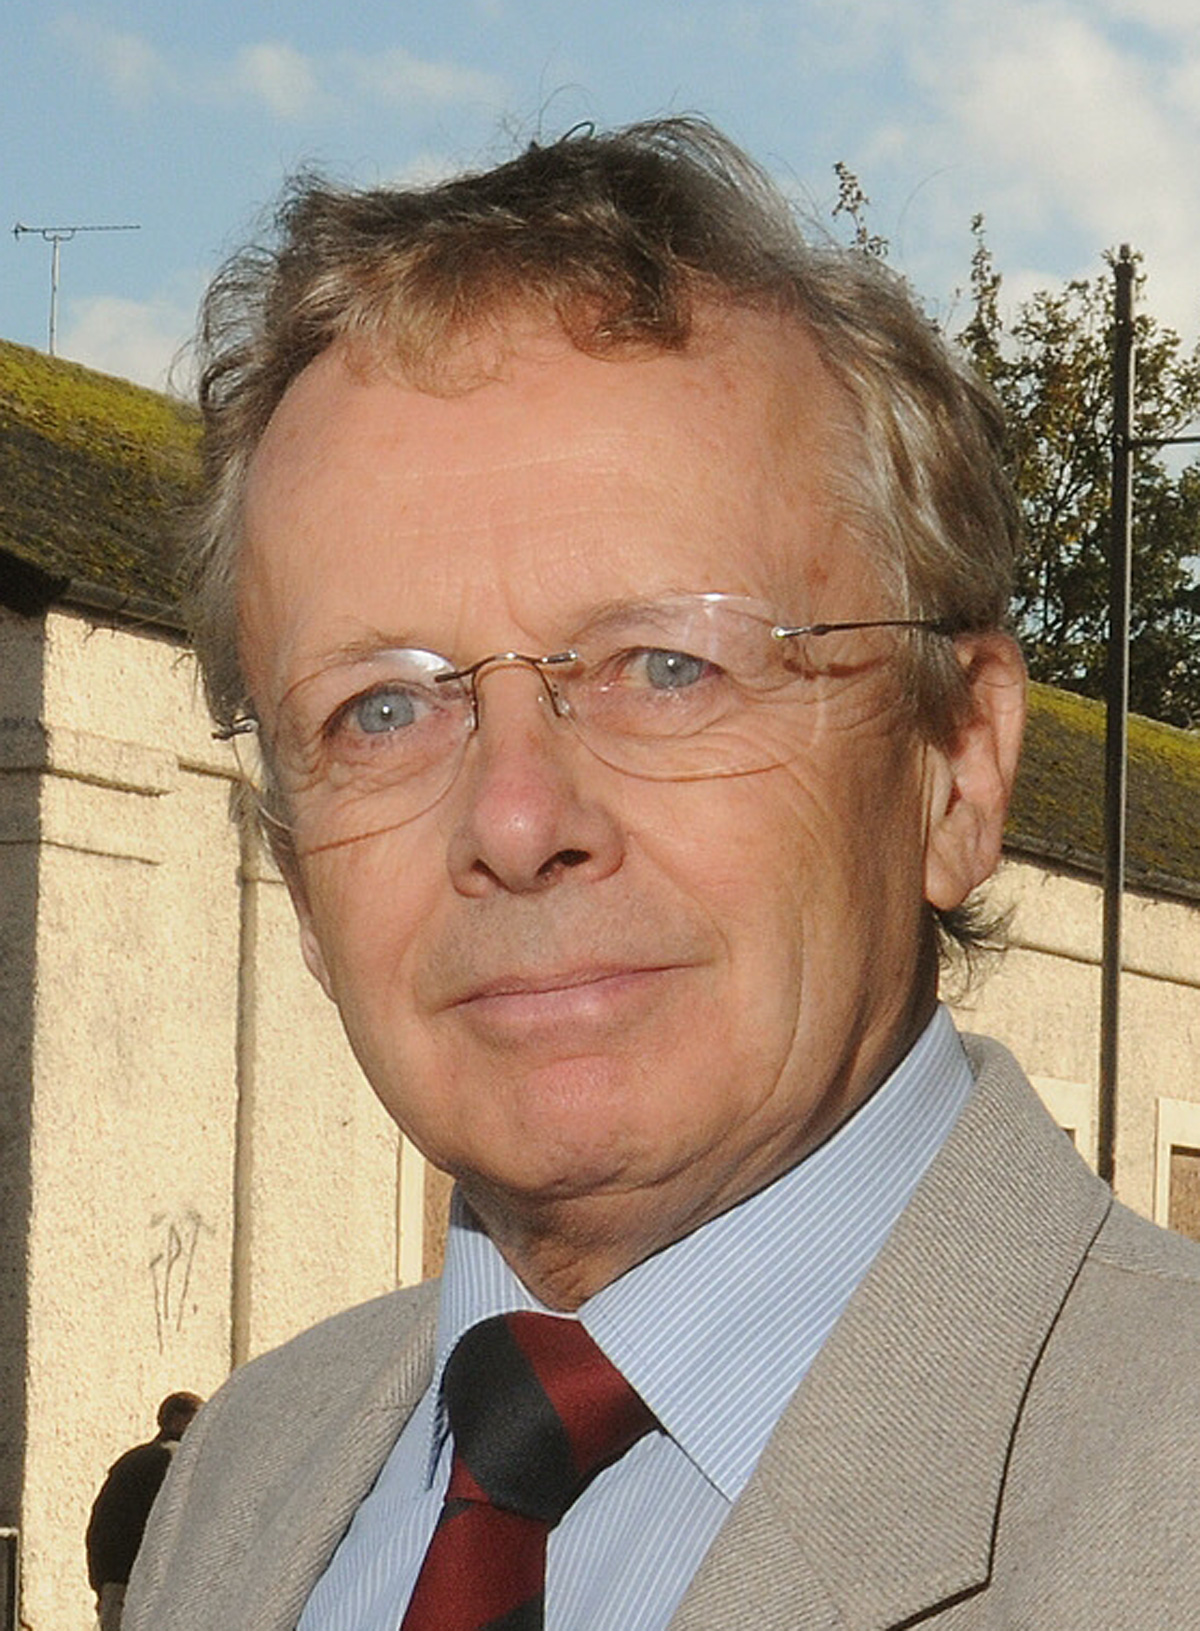 Yorkshire Air Museum director Ian Reed